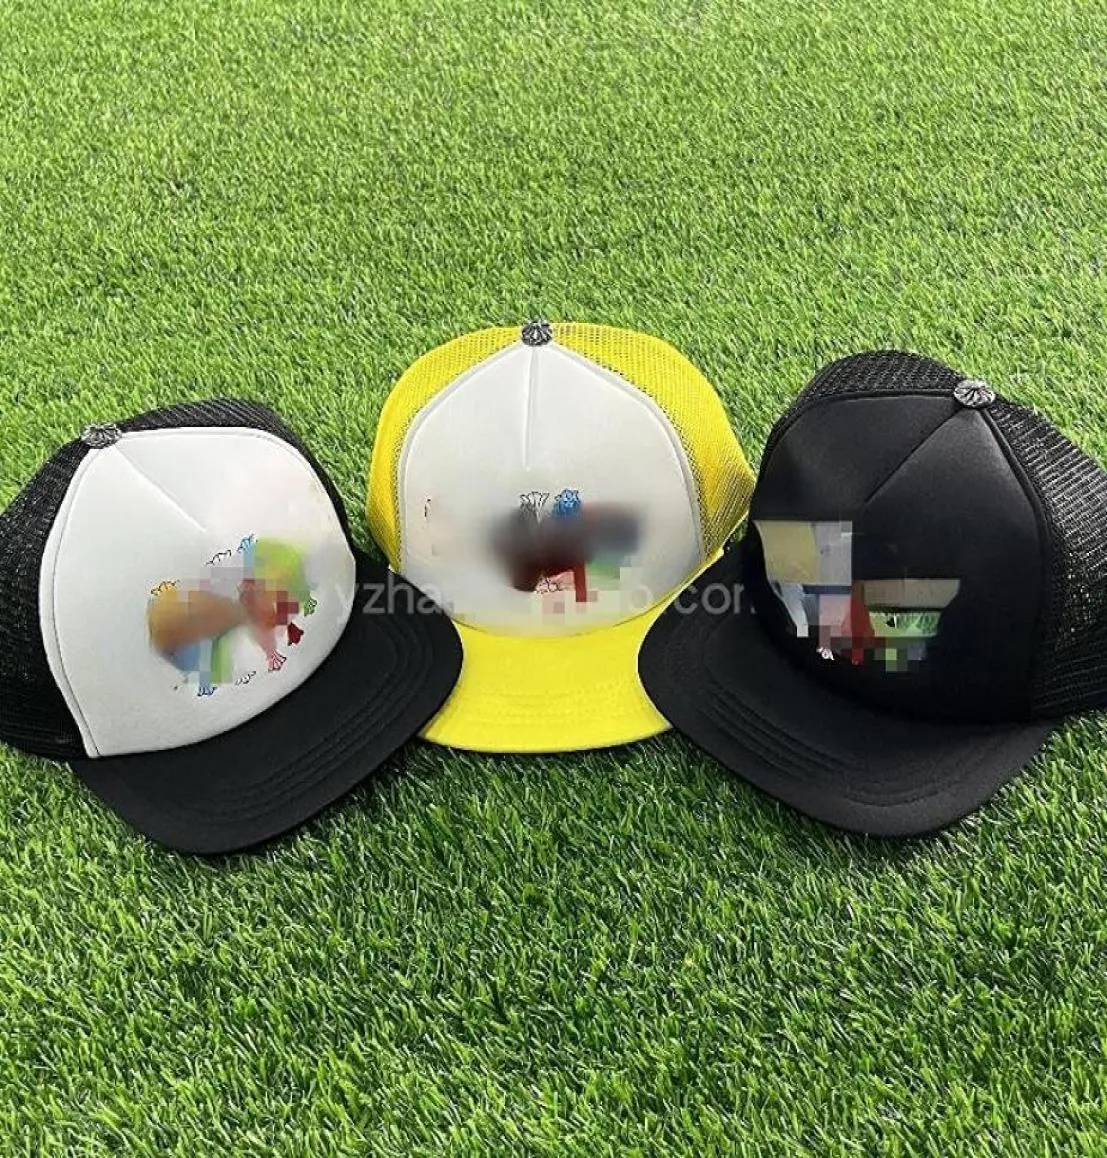 Adjustable Ball Caps for Men and Woemn Casual Colorful Taco Cross Trucker  Hats5716355